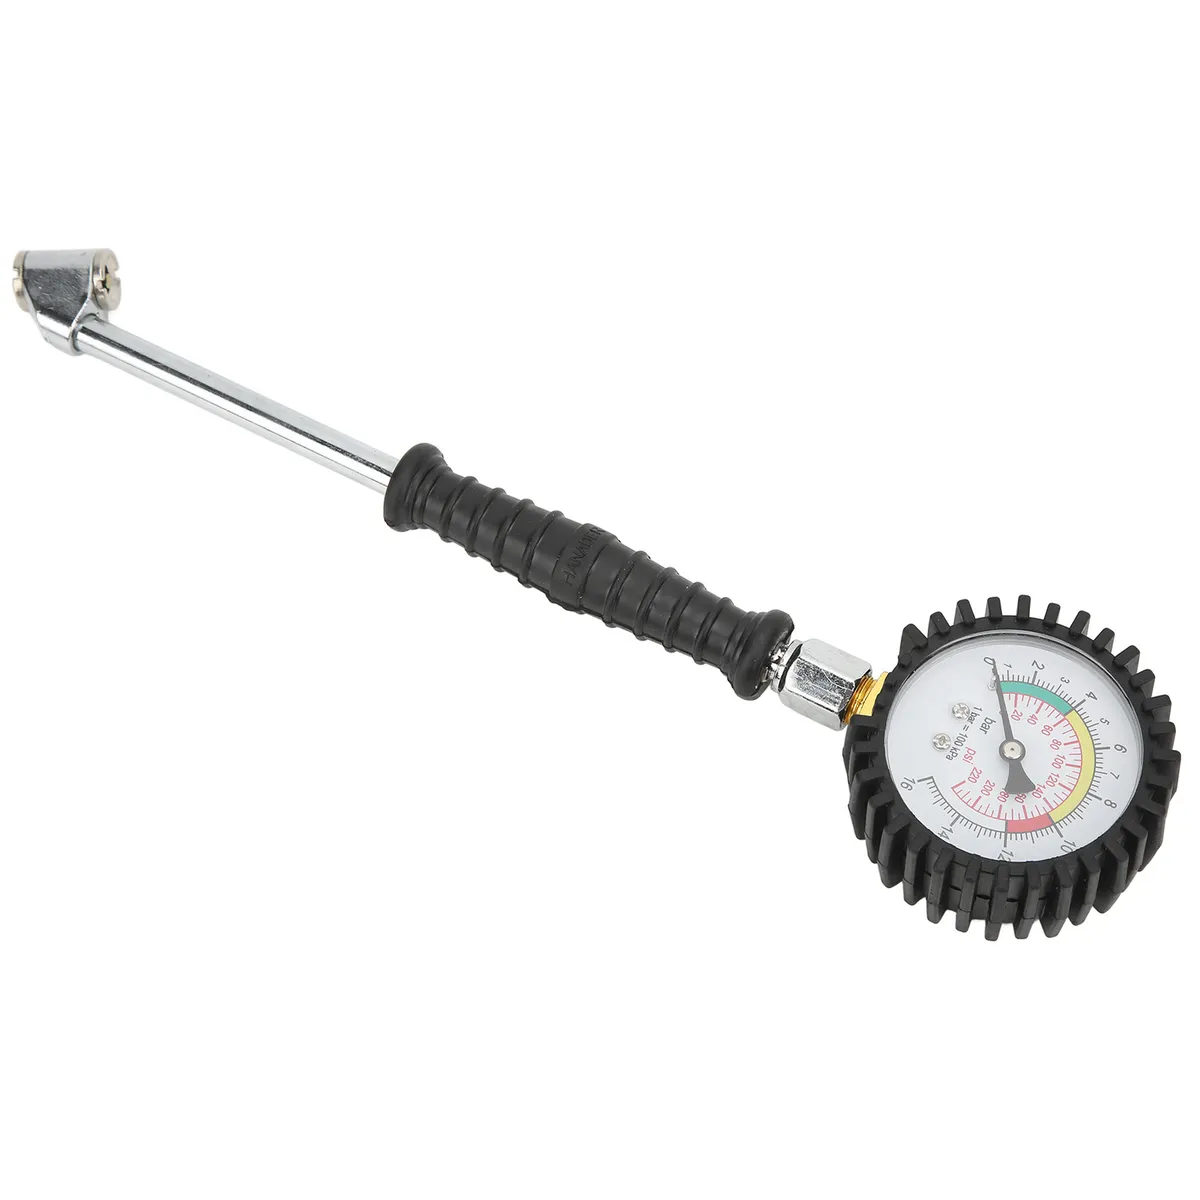 Tire Pressure Gauge Review: Accurate and Reliable Tool